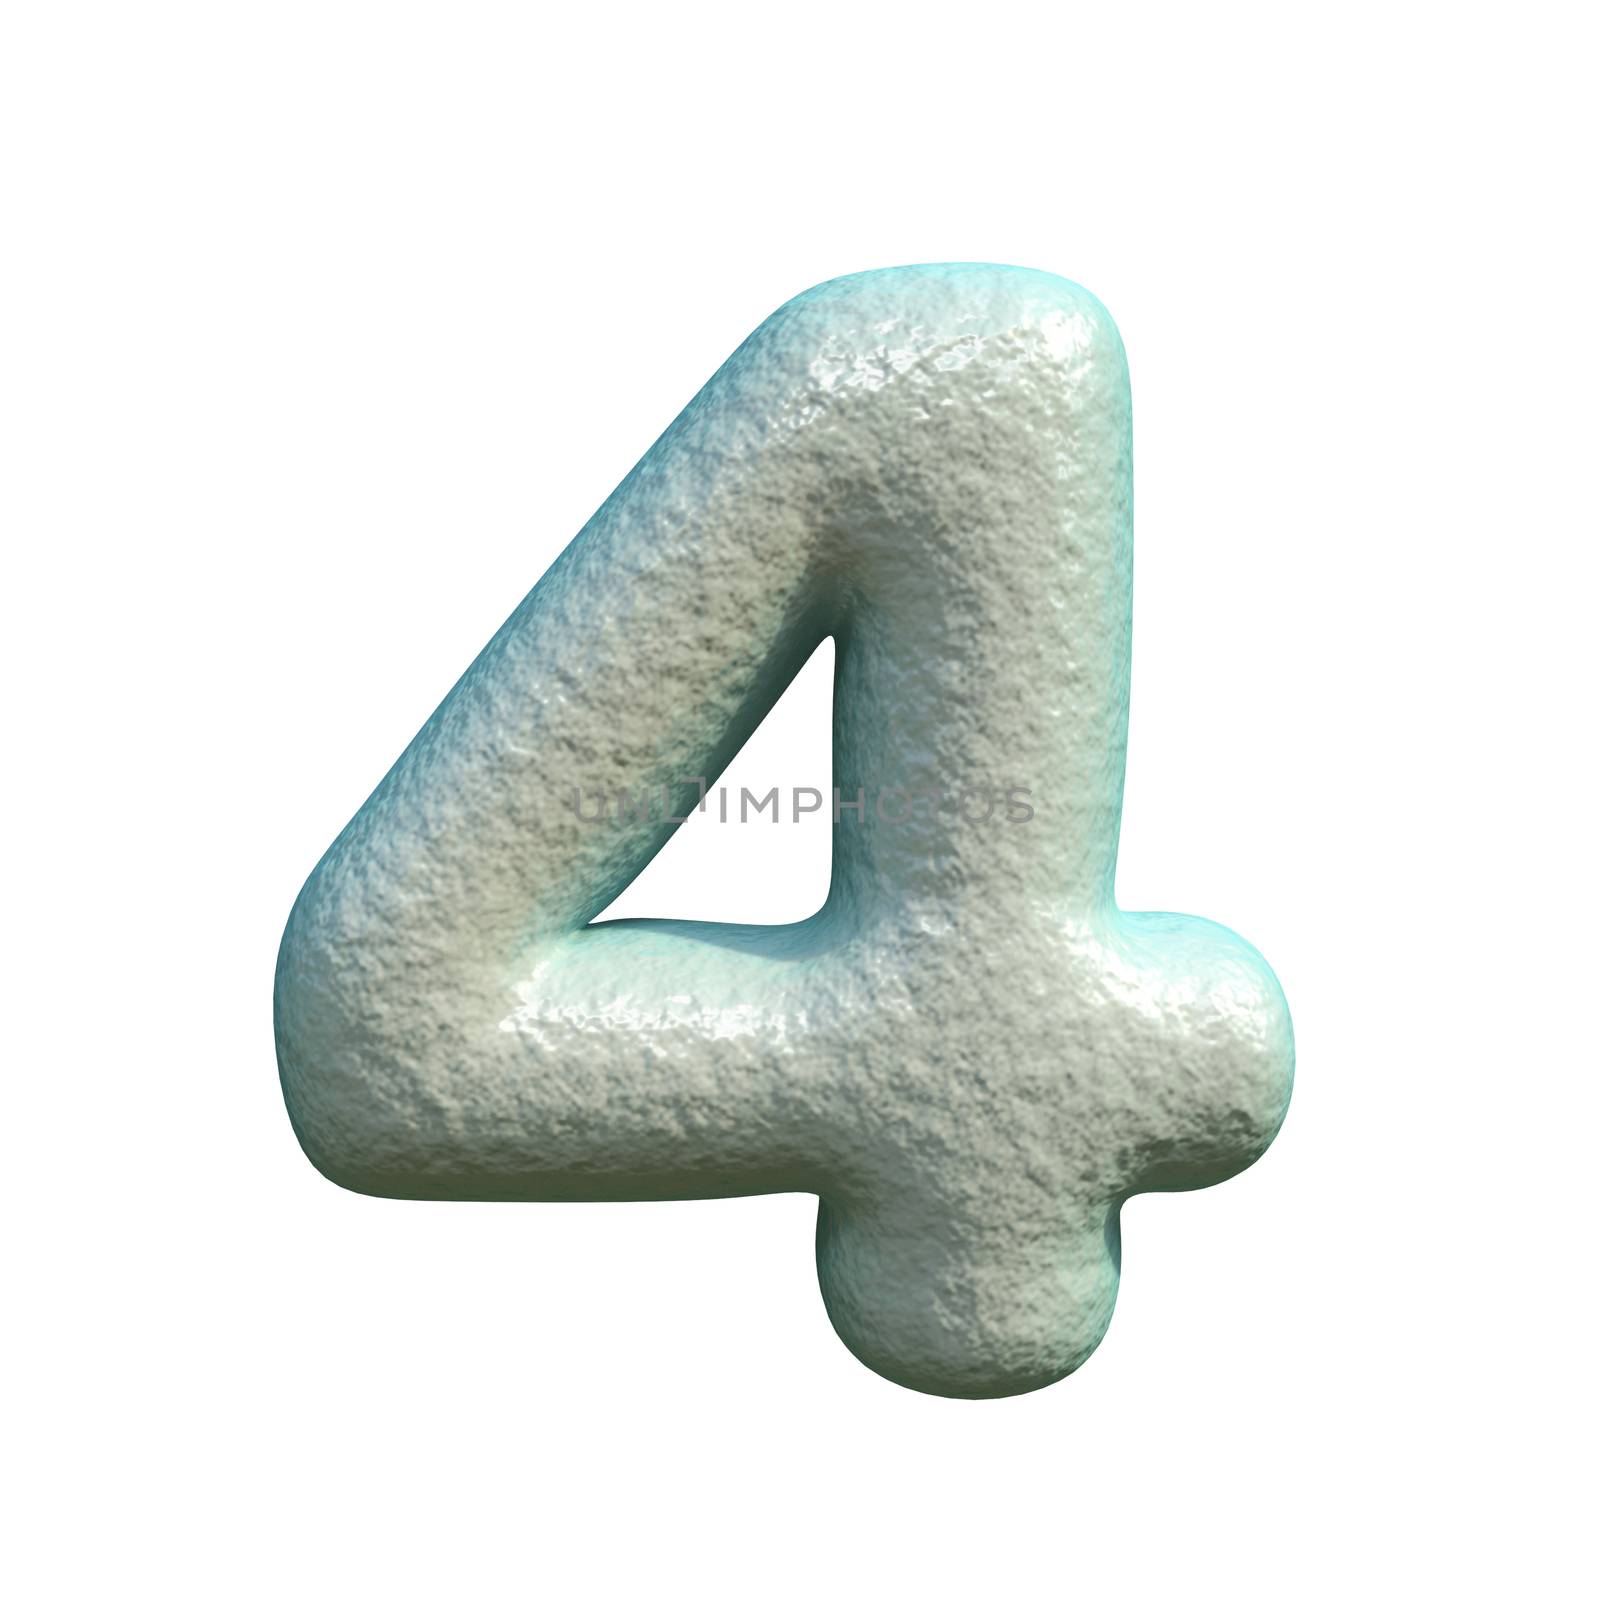 Grey blue clay Number 4 FOUR 3D rendering illustration isolated on white background